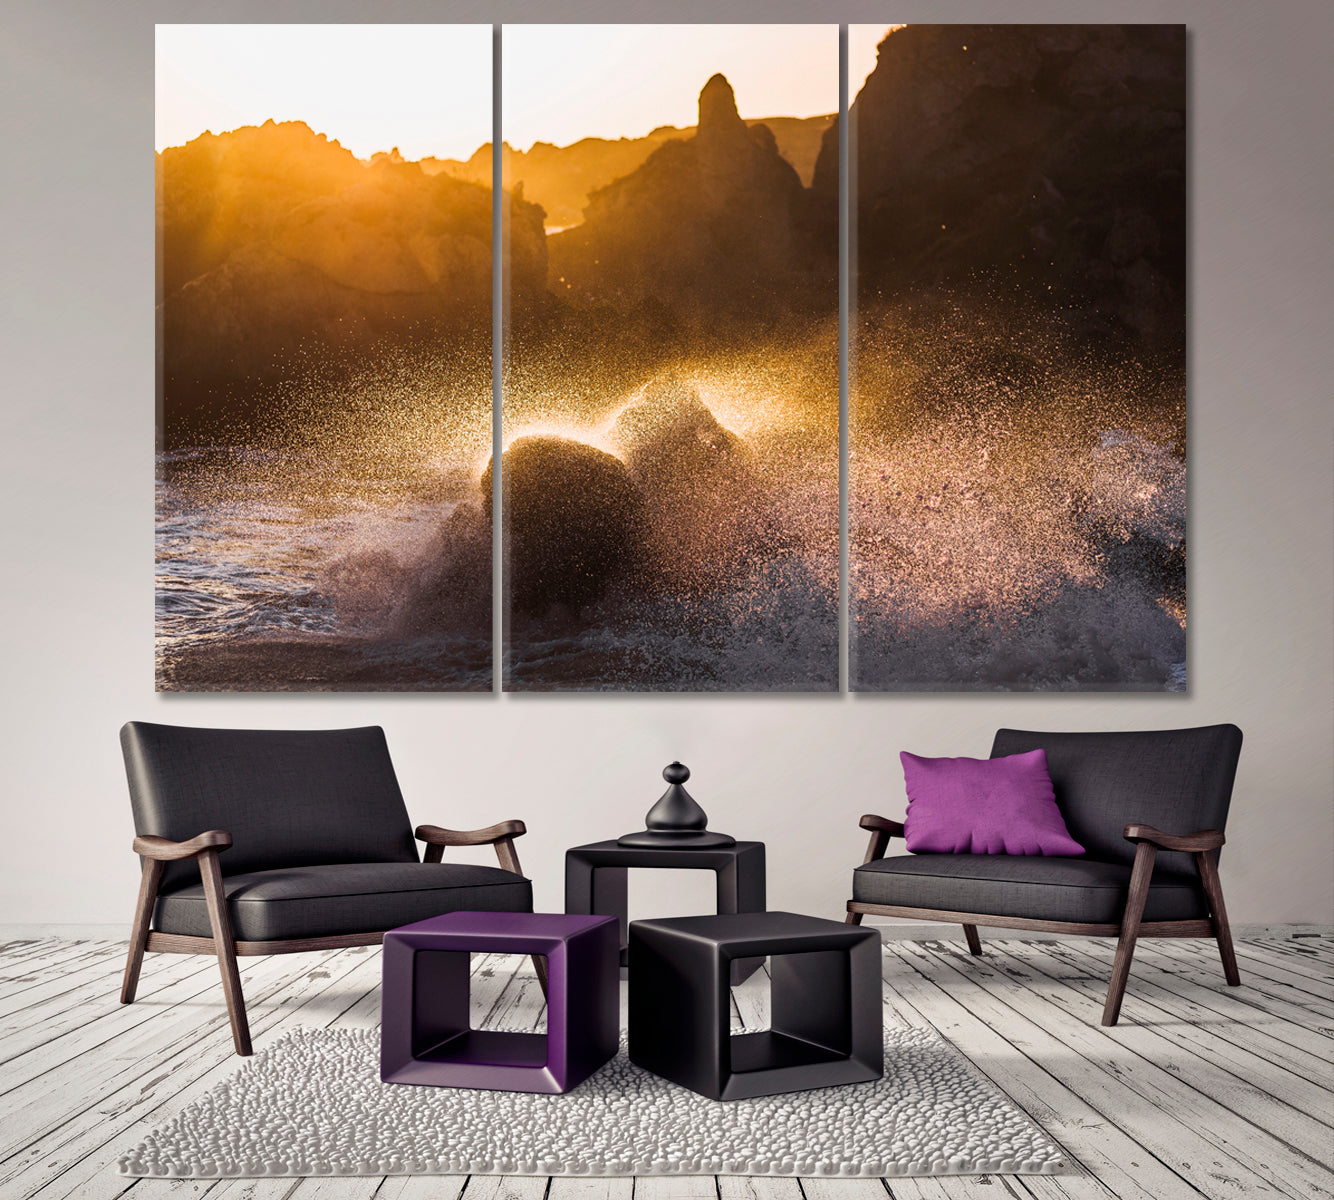 CLIFF Waves crashing on Rocks in Sunlight Nature Wall Canvas Print Artesty 3 panels 36" x 24" 